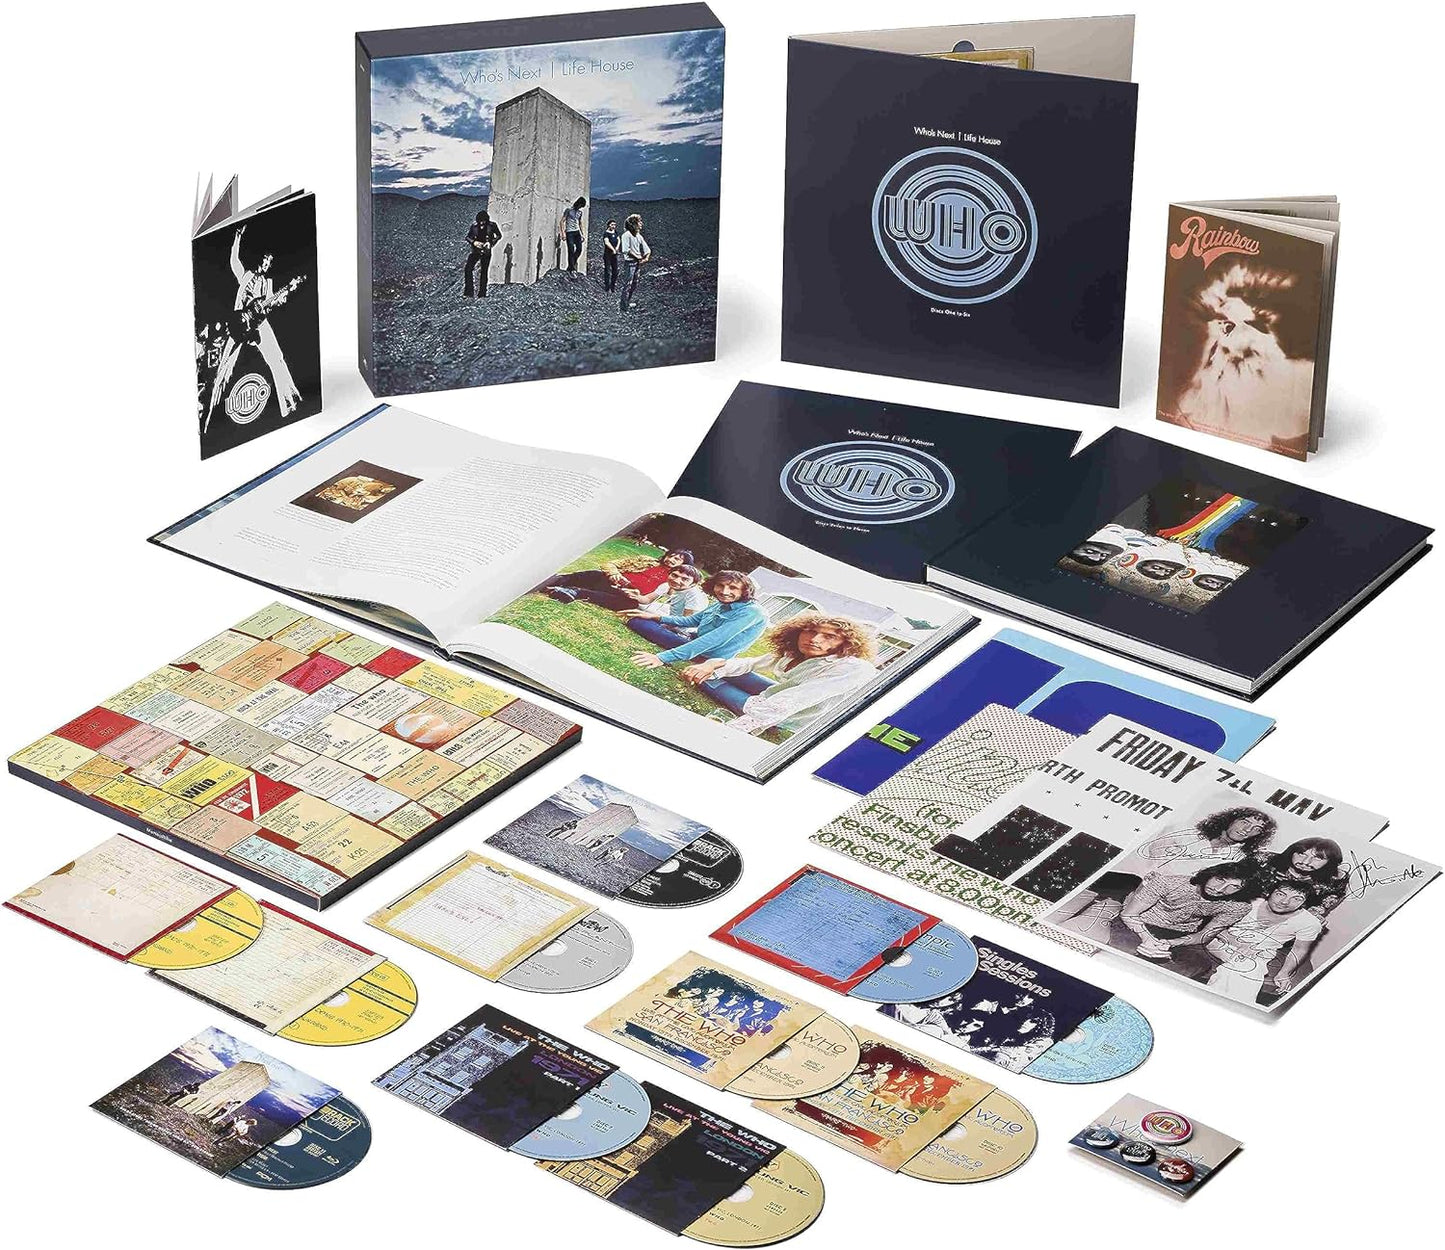 10CD/BluRay - The Who - Who's Next / Life House Super Deluxe Edition